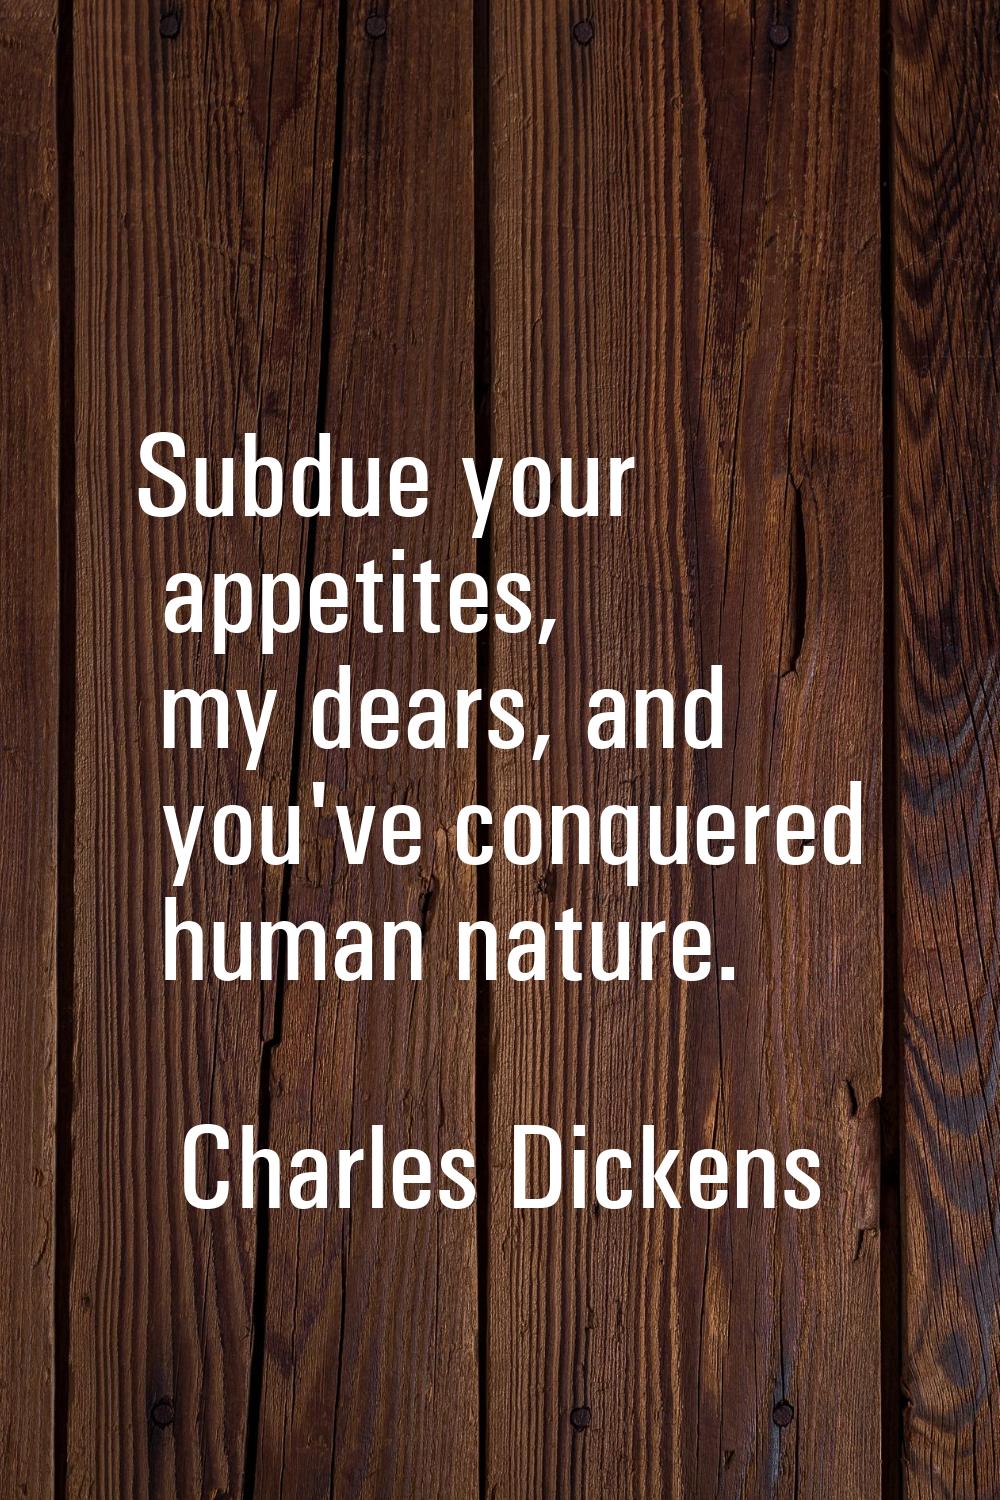 Subdue your appetites, my dears, and you've conquered human nature.